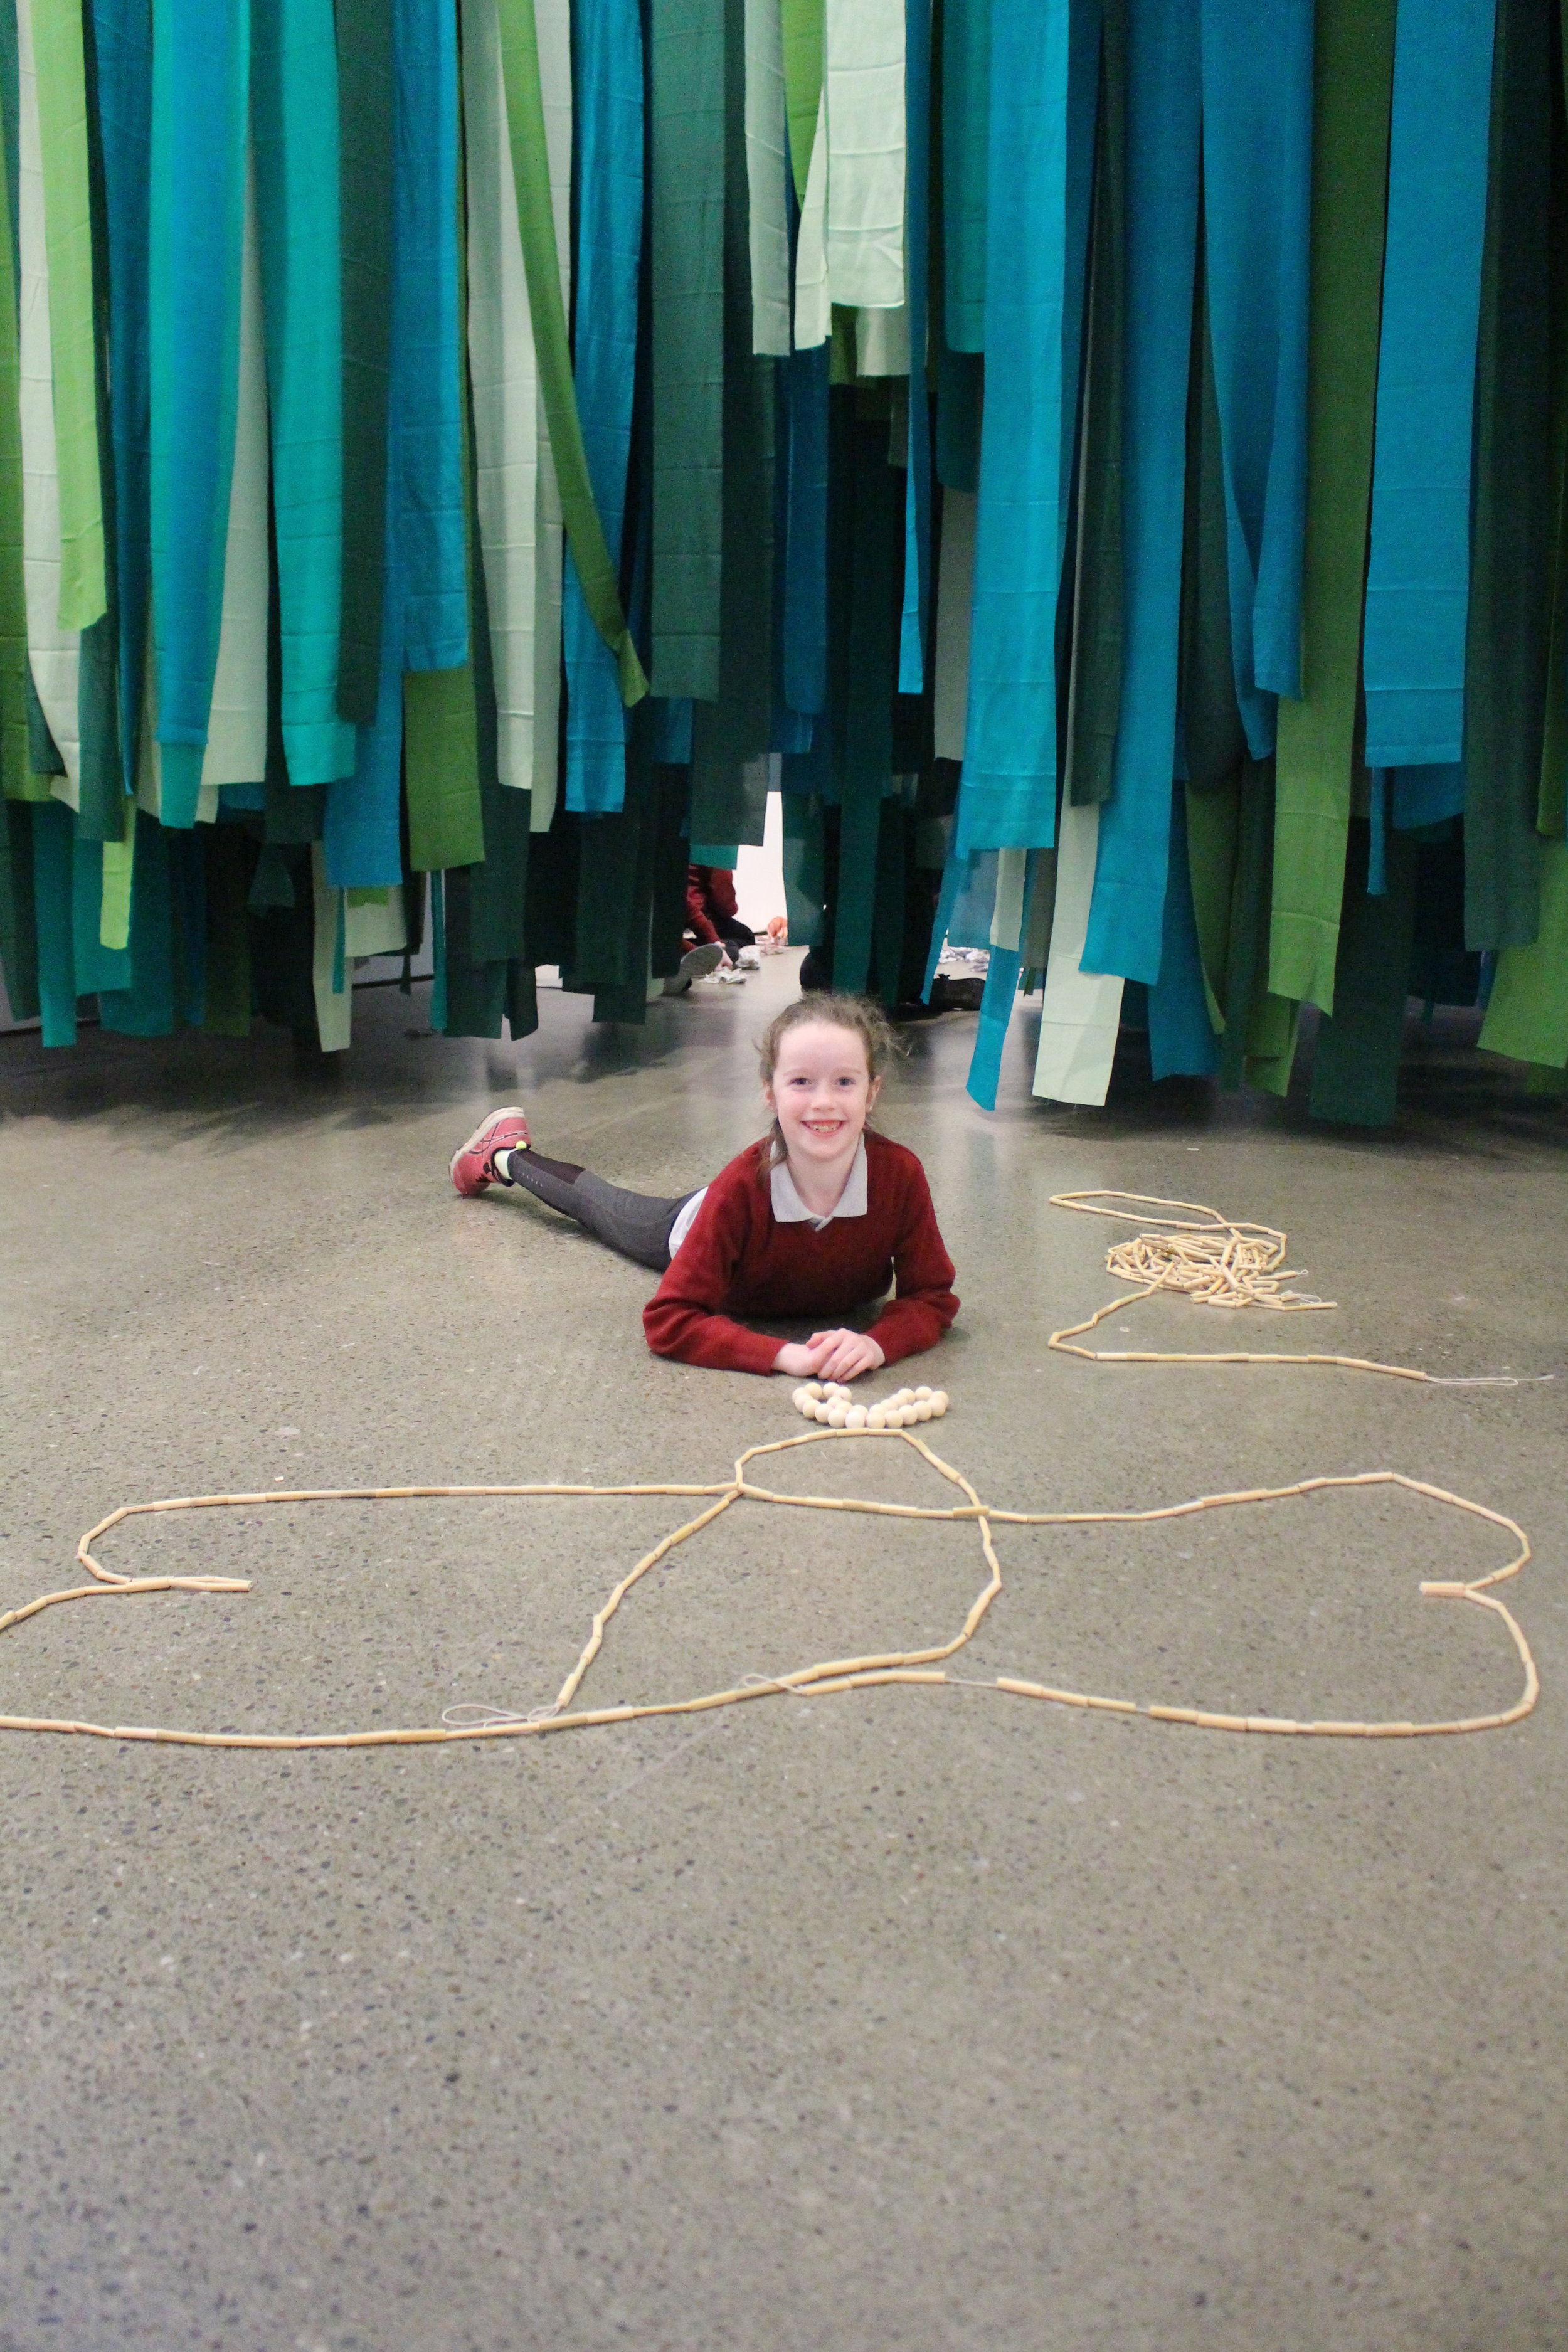  Drawing on the floor with a beaded line, one of the ‘mobile elements’ in Caoimhe Kilfeather’s body of work 